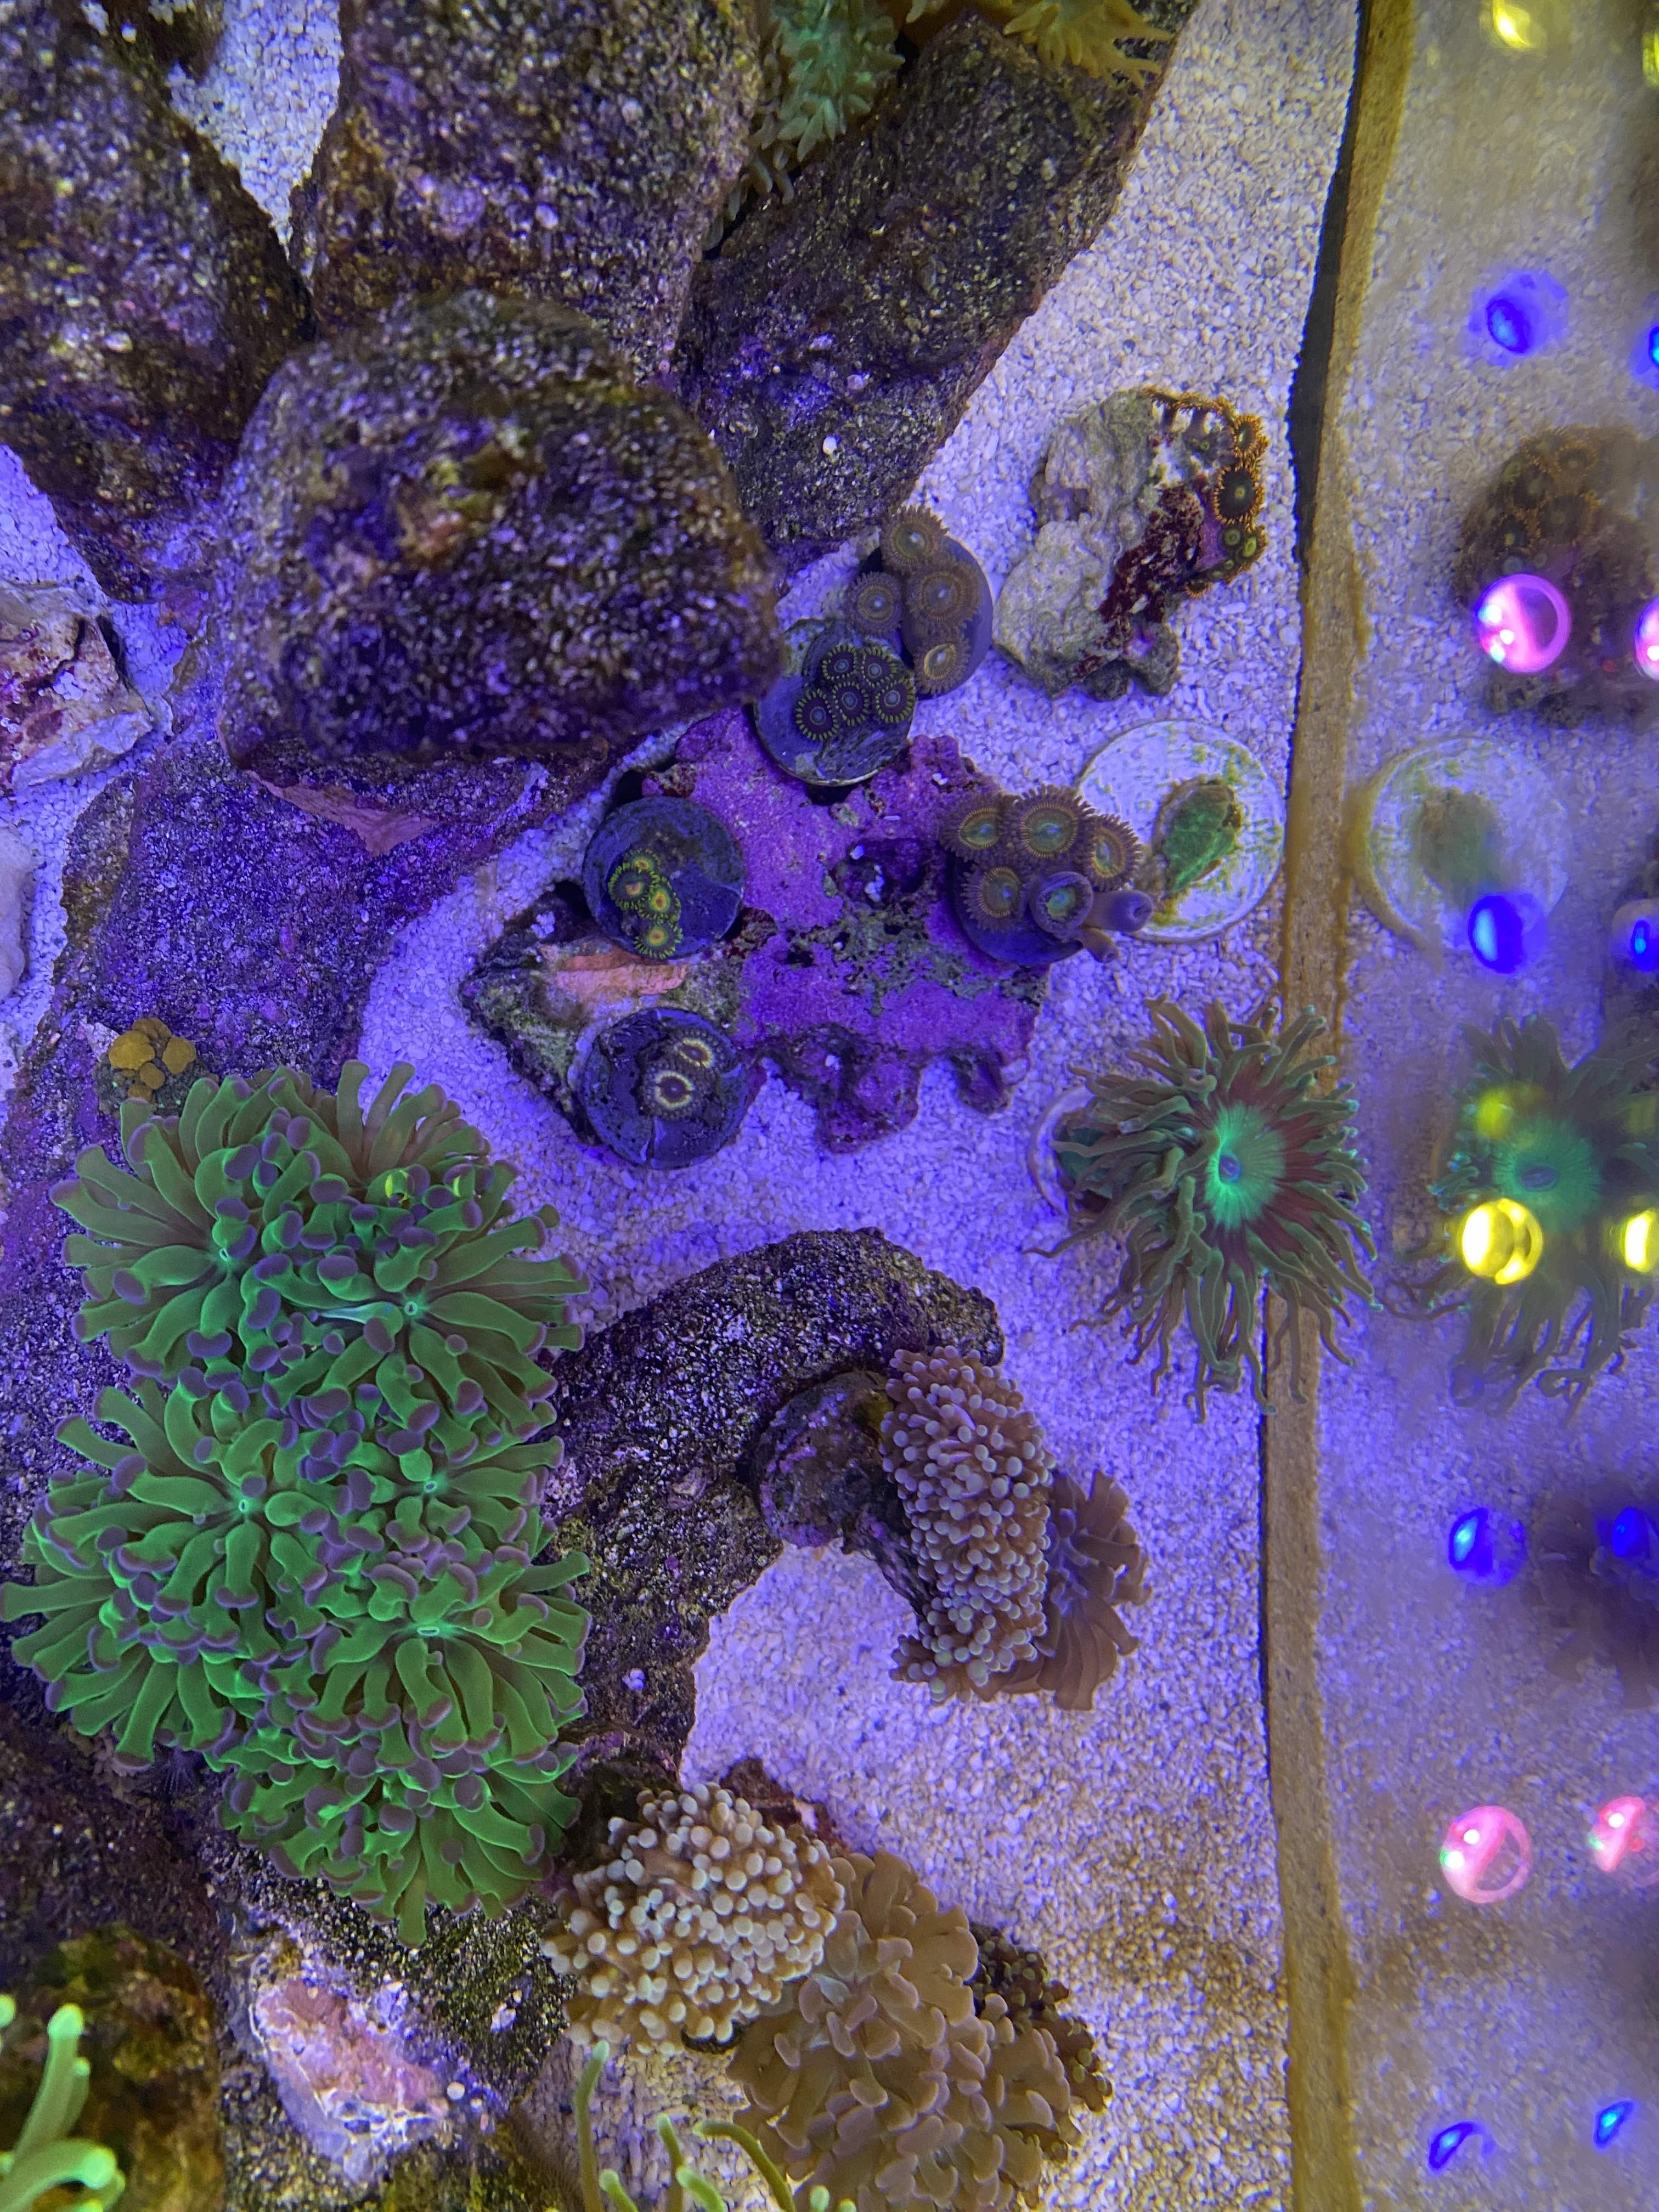 zoas and frog.jpg